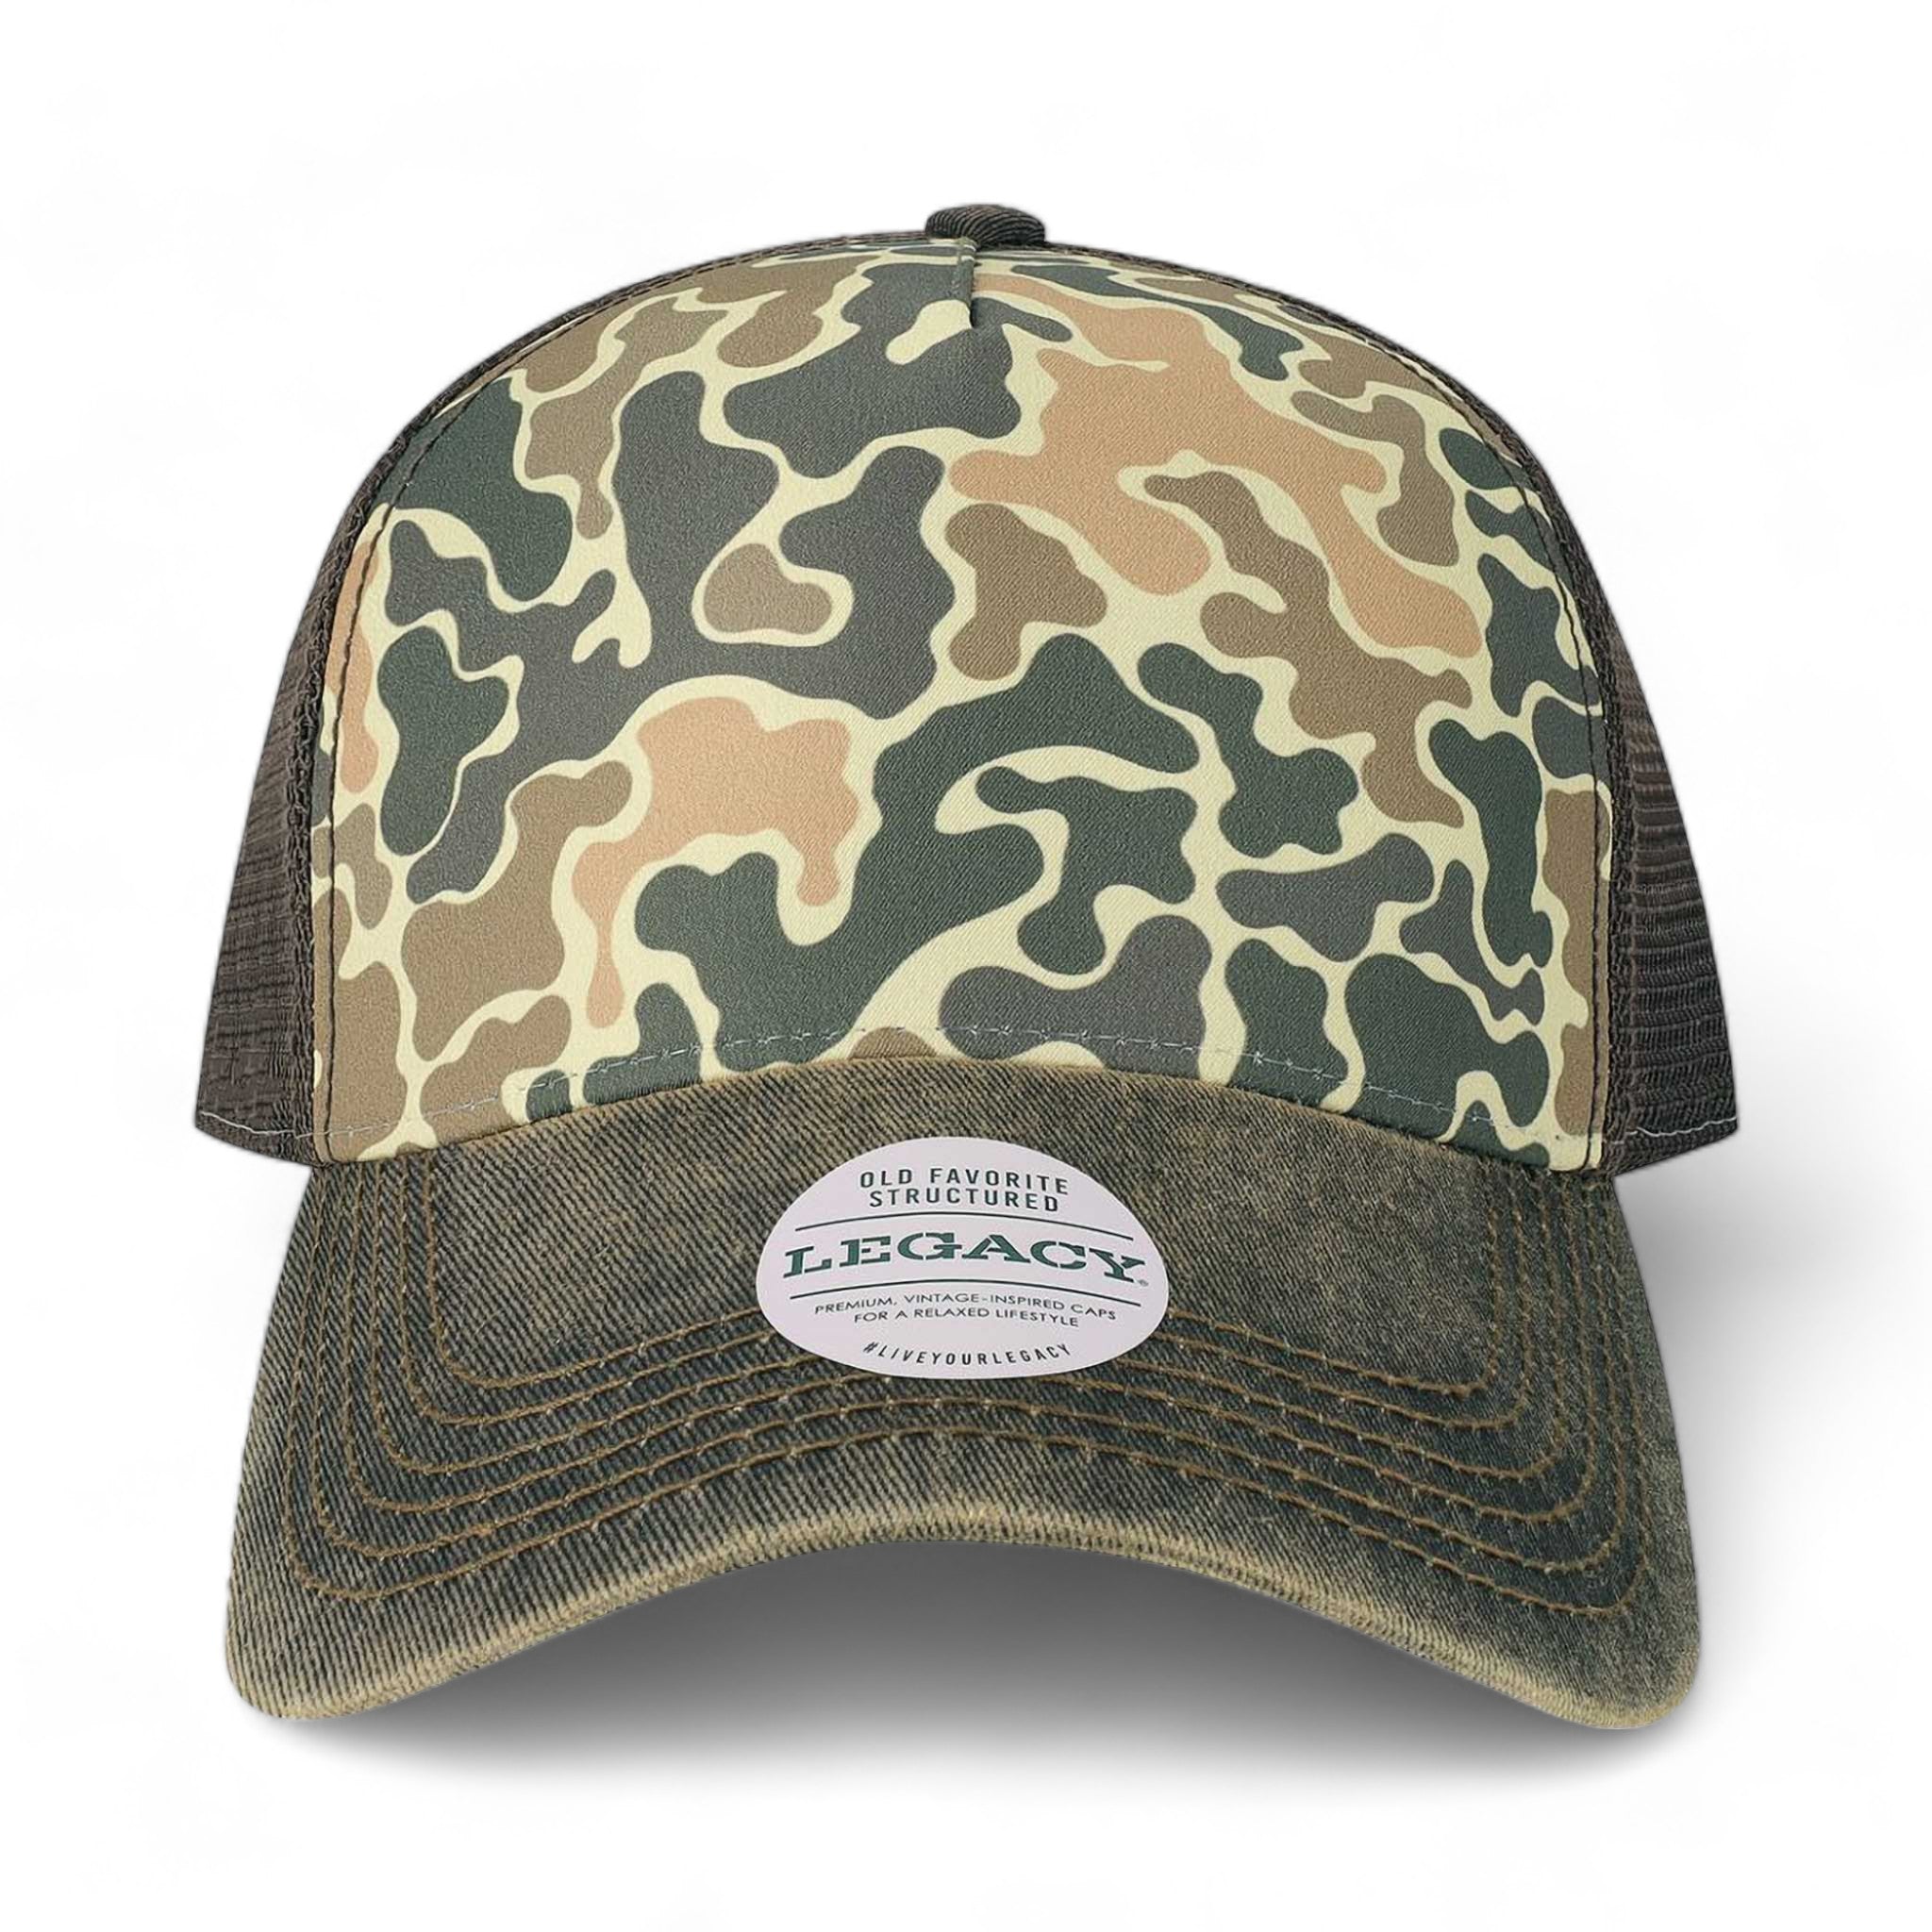 Front view of LEGACY OFAFP custom hat in brown camo blotch